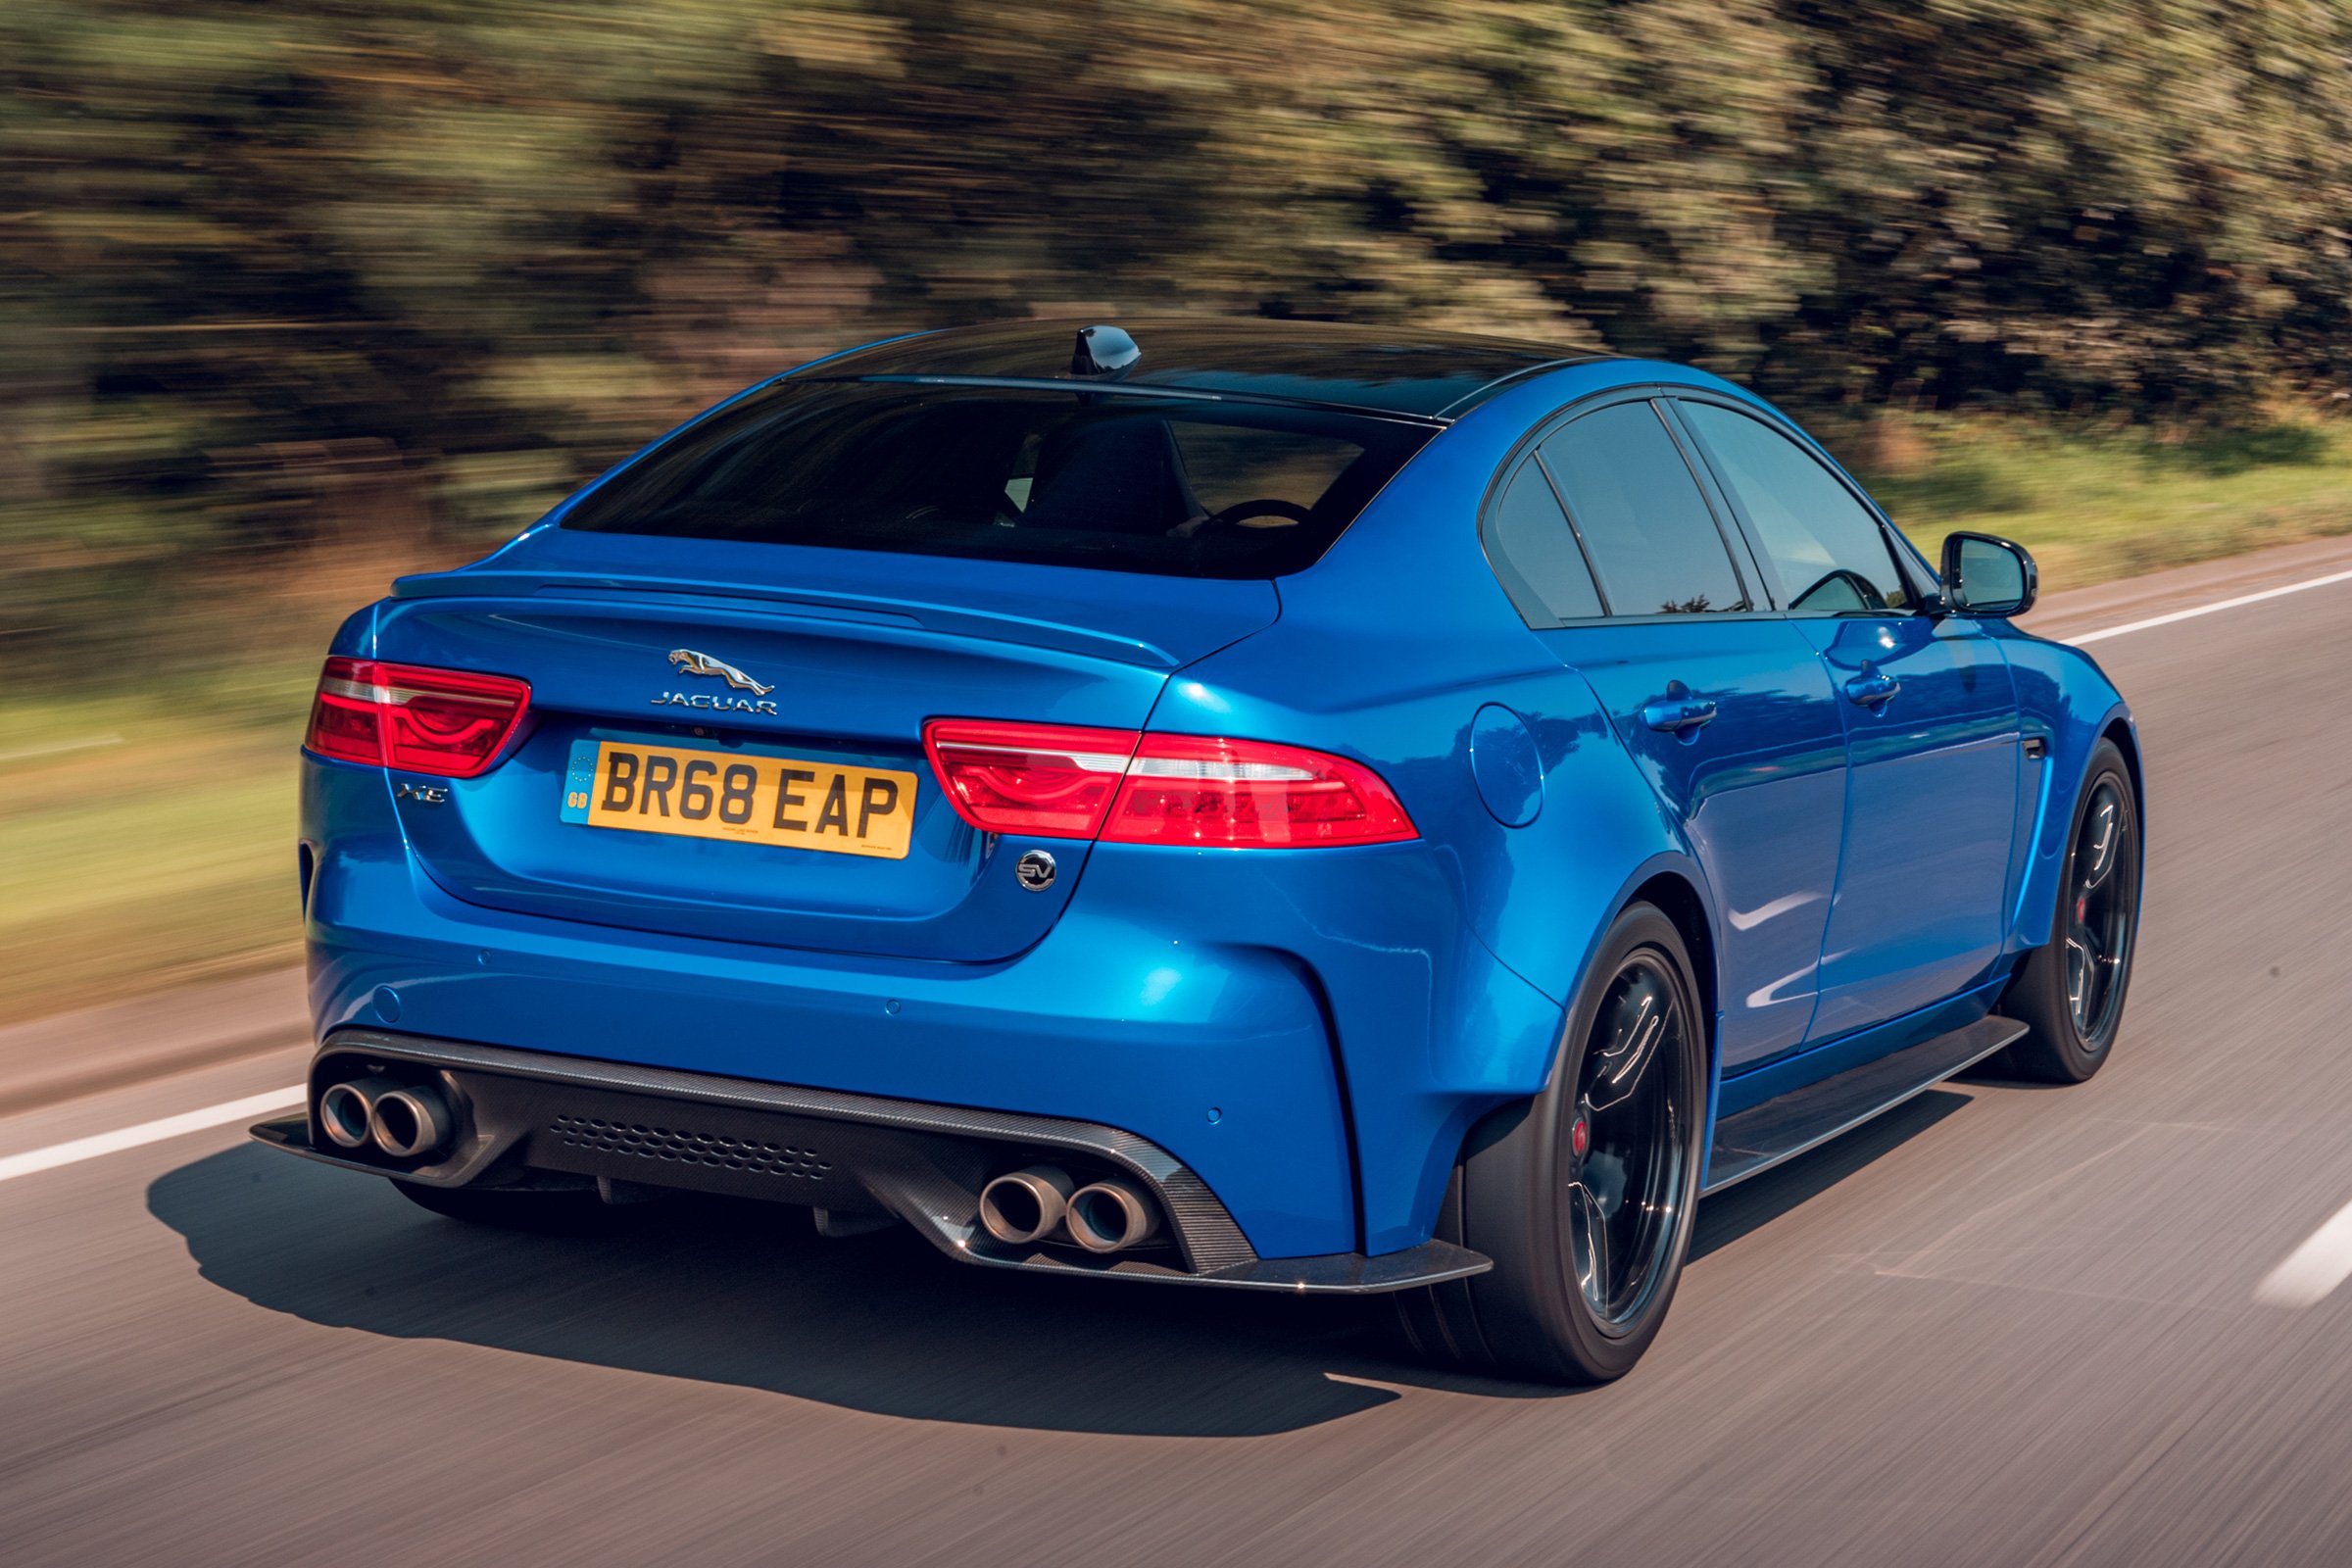 Auto Express on Twitter: "REVIEW: The new #Jaguar XE SV Project 8 Touring  loses the gigantic wing, but it's still not exactly subtle. Read our full  review of this 200mph saloon here…&gt;&gt;